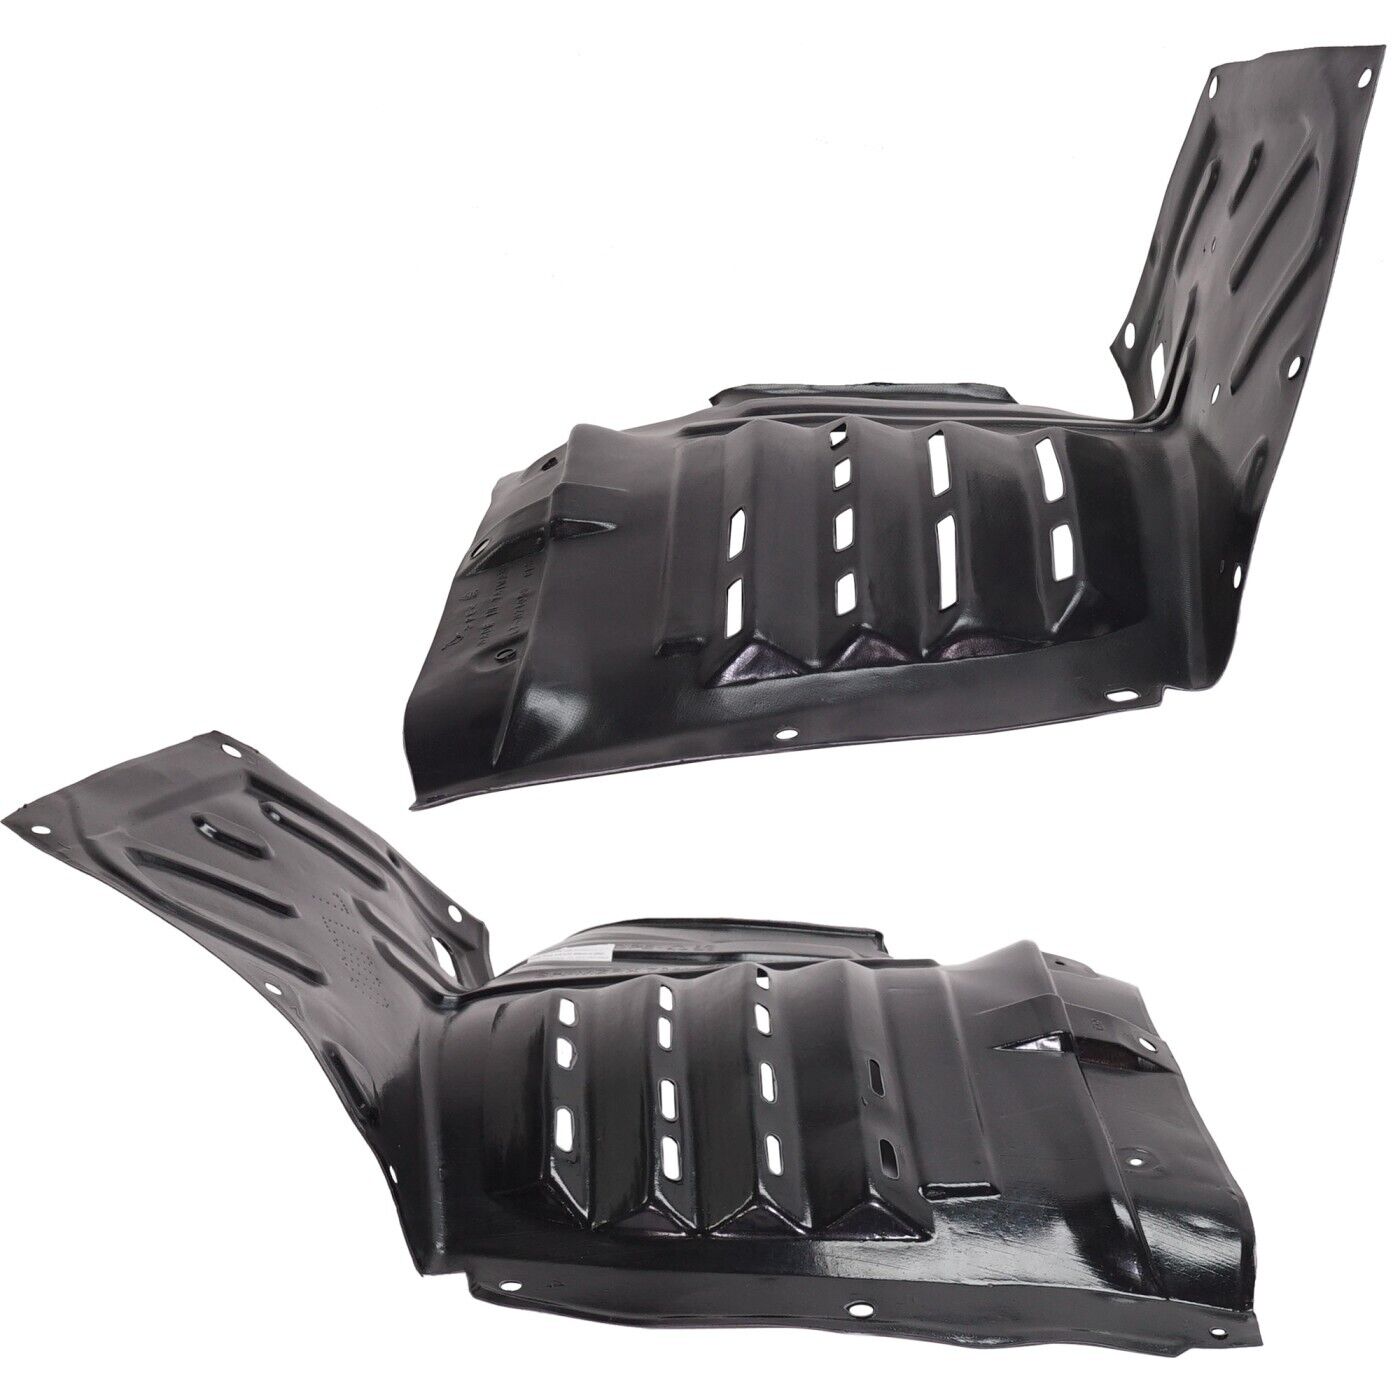 Splash Shield For 2004-2008 Mazda RX-8 Front Left & Right Front Section Set of 2